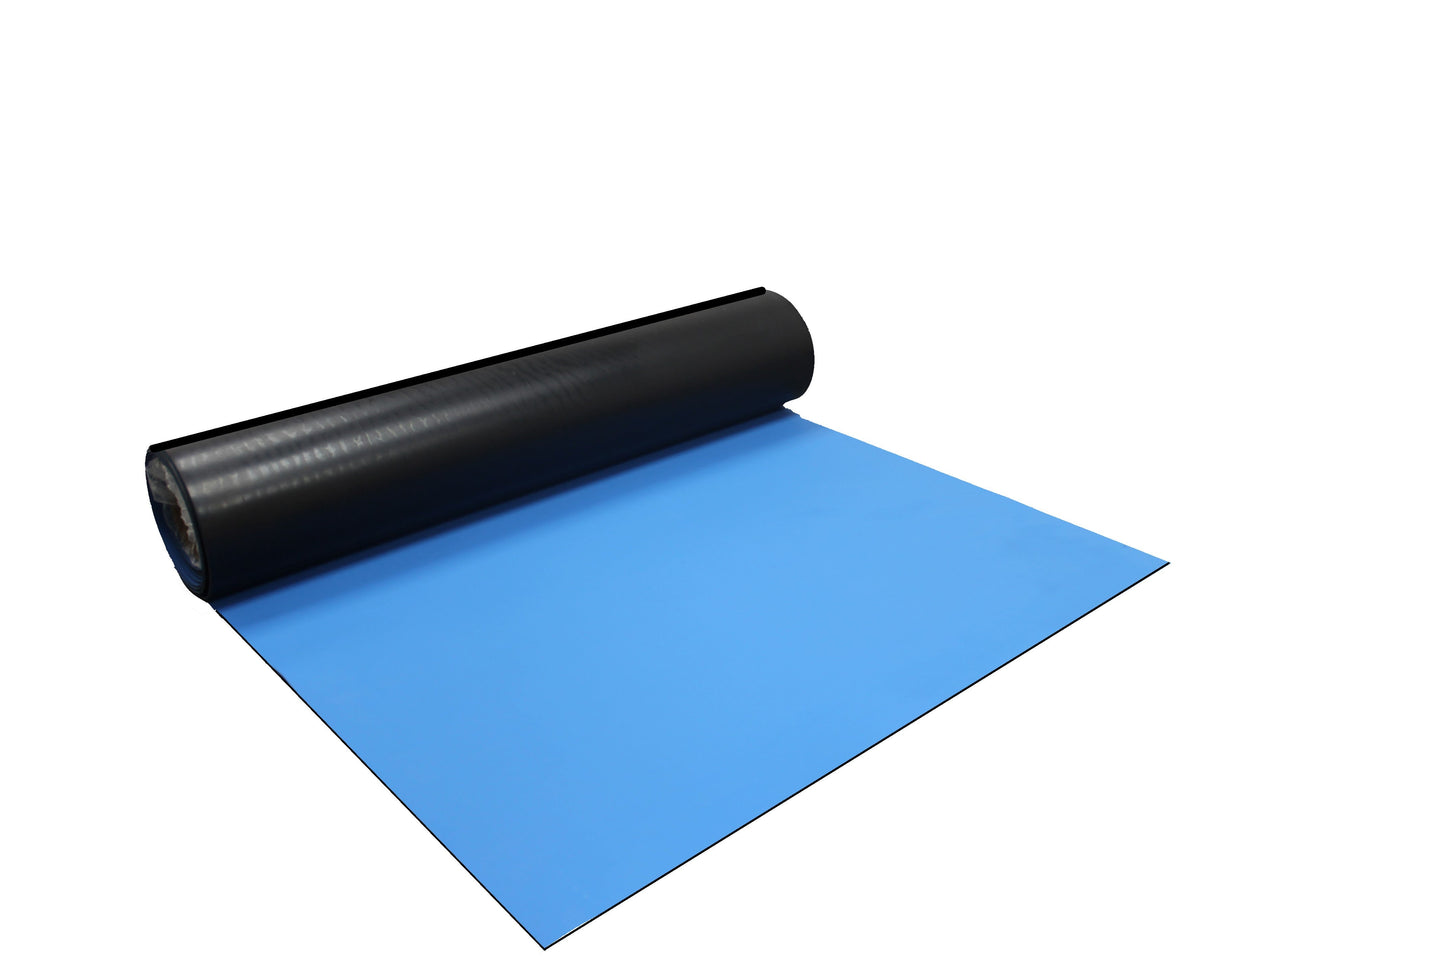 Two Layer Dissipative/Conductive Natural Rubber Worksurface Mat - Rolls